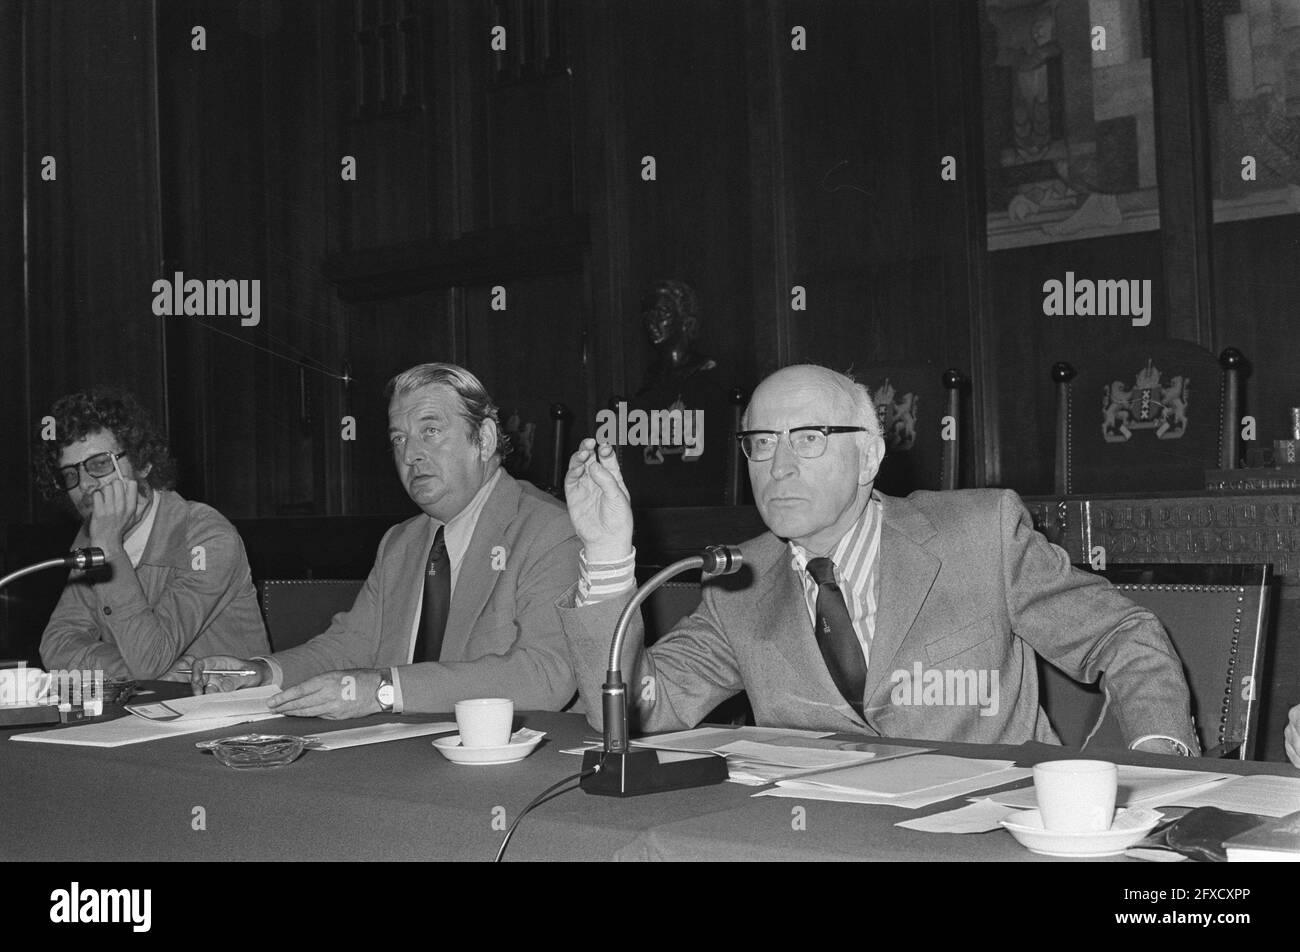 Press conference of the city of Amsterdam about the 700th anniversary of the city of Amsterdam; nr. 25 Samkalden (l) and Mastenbroek, 19 August 1974, municipalities, press conferences, The Netherlands, 20th century press agency photo, news to remember, documentary, historic photography 1945-1990, visual stories, human history of the Twentieth Century, capturing moments in time Stock Photo